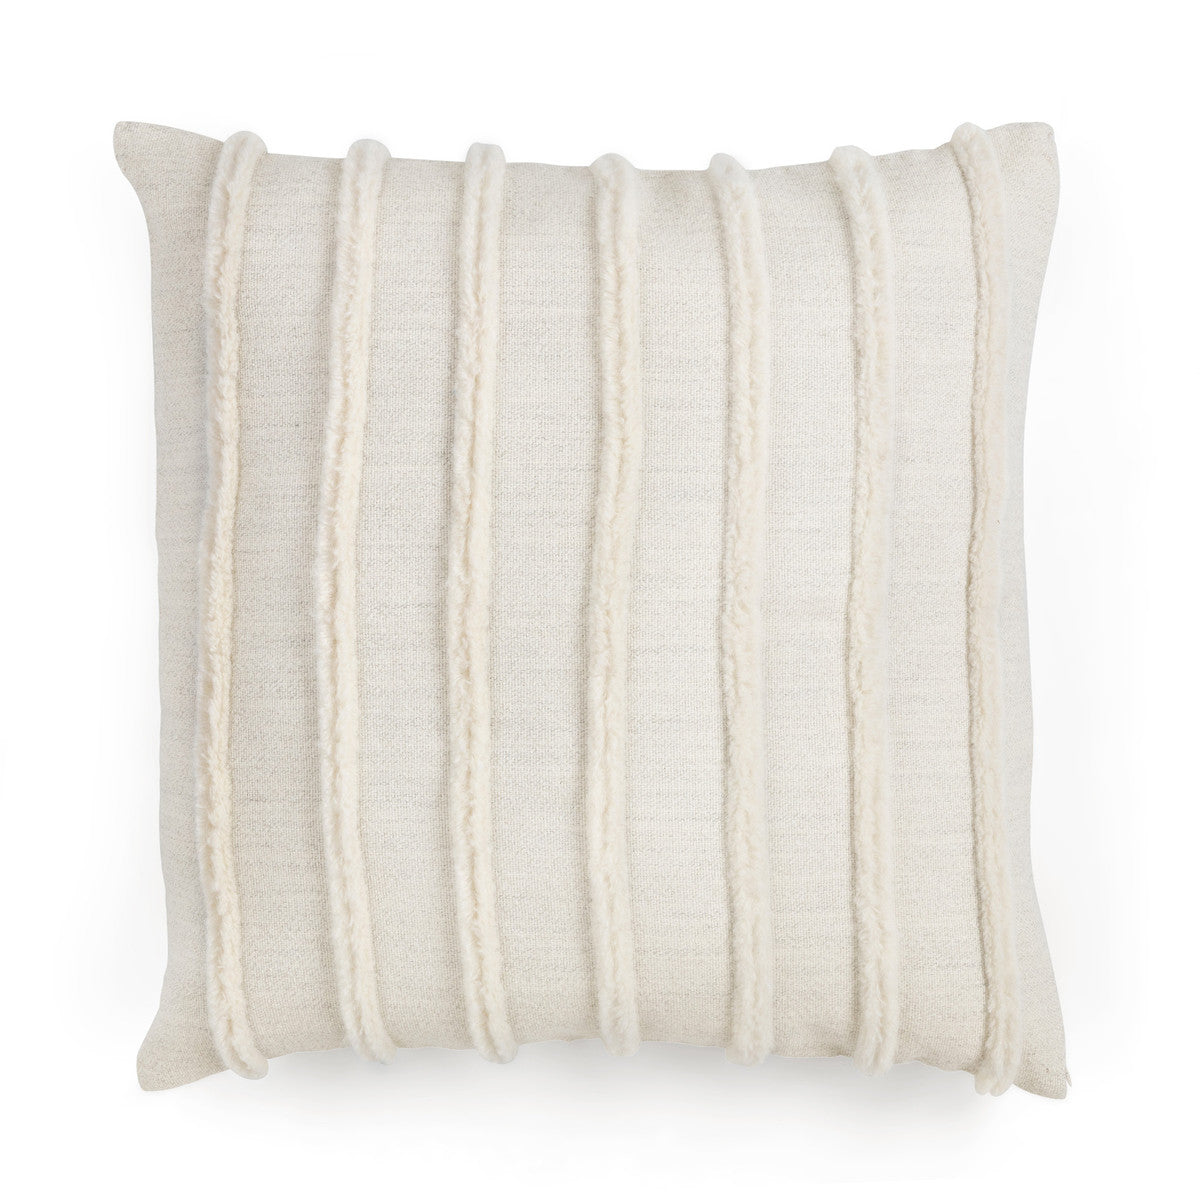 Texture Stripe Alpaca Wool Pillow Cover, Square or Rectangle